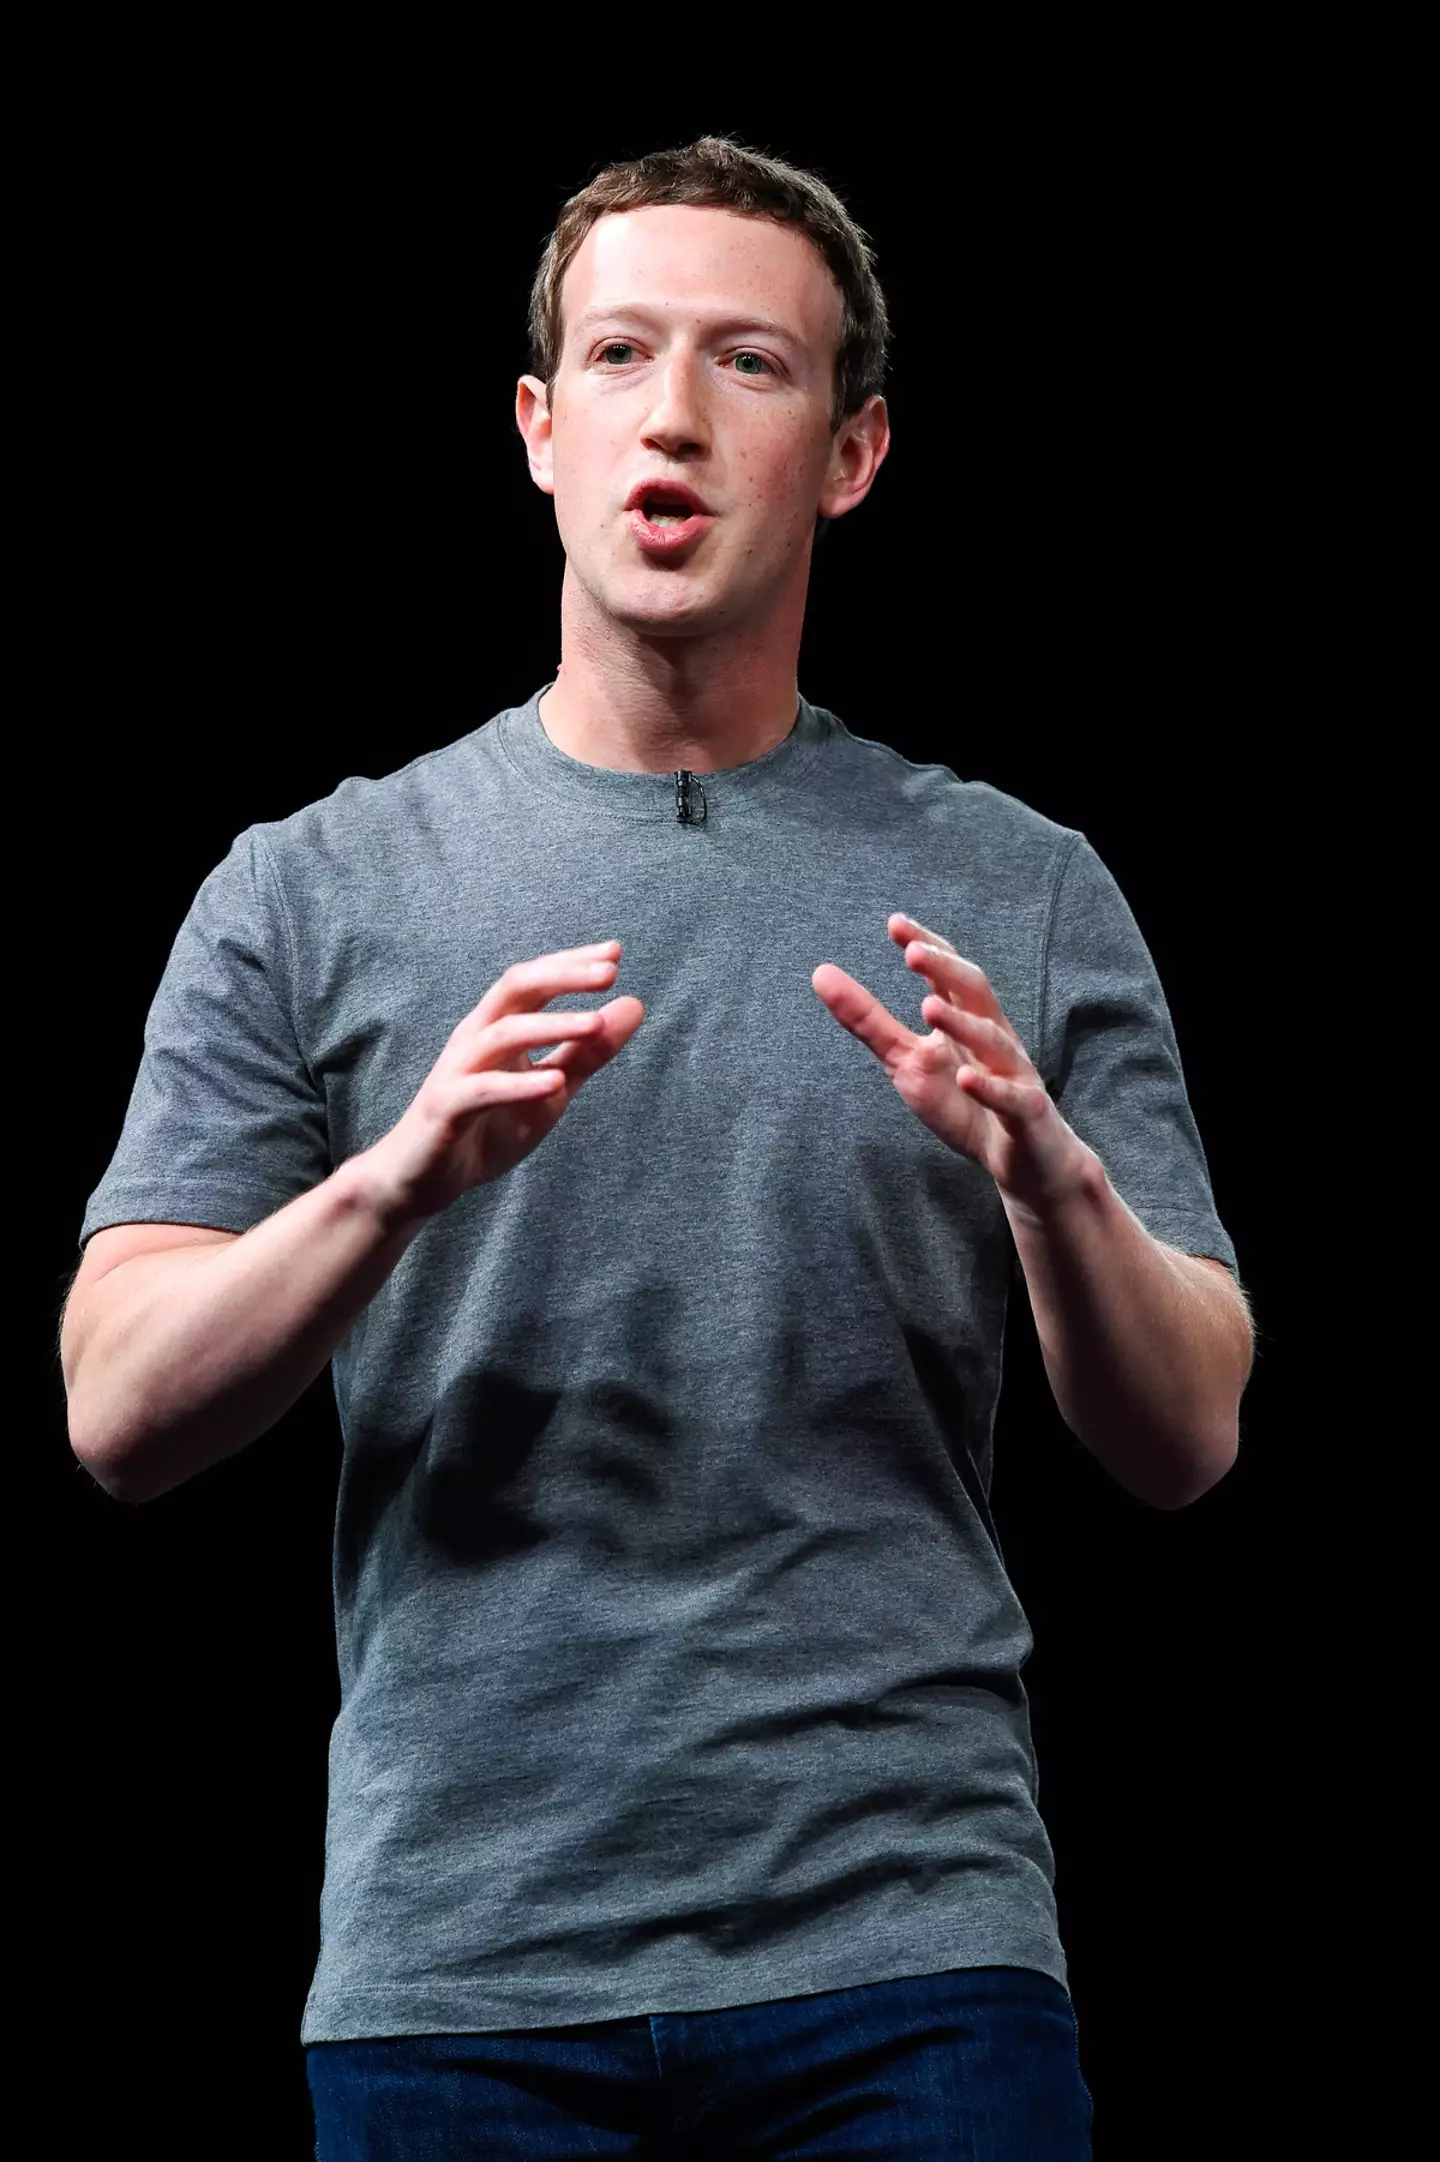 Mark Zuckerberg's Meta is being threatened with legal action.